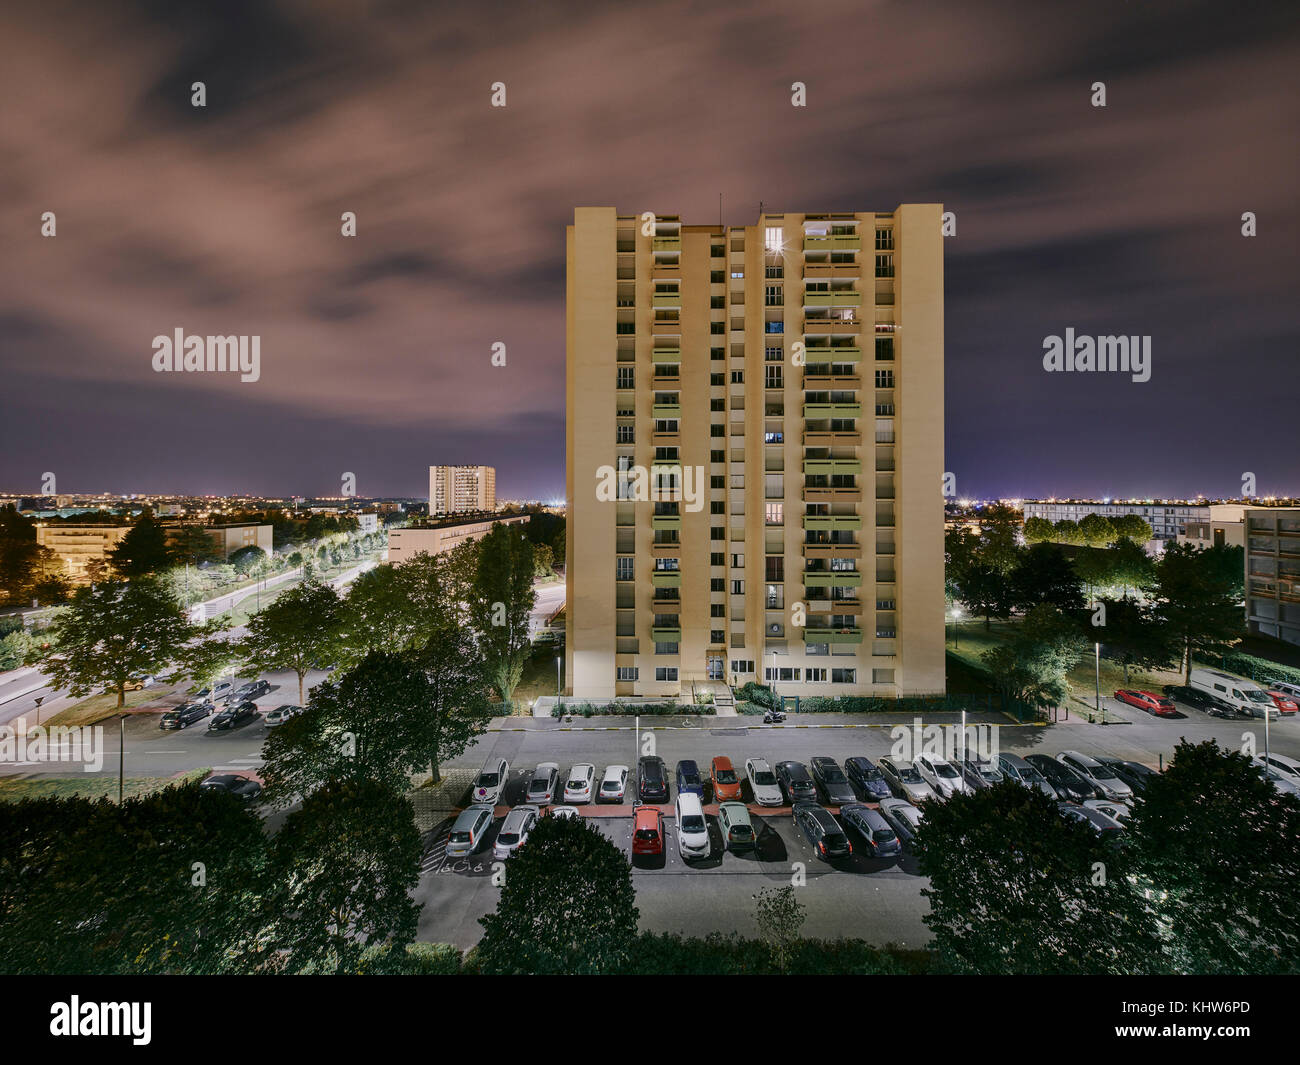 Elevated view of apartment block at night, Dijon, Burgundy, France Stock Photo